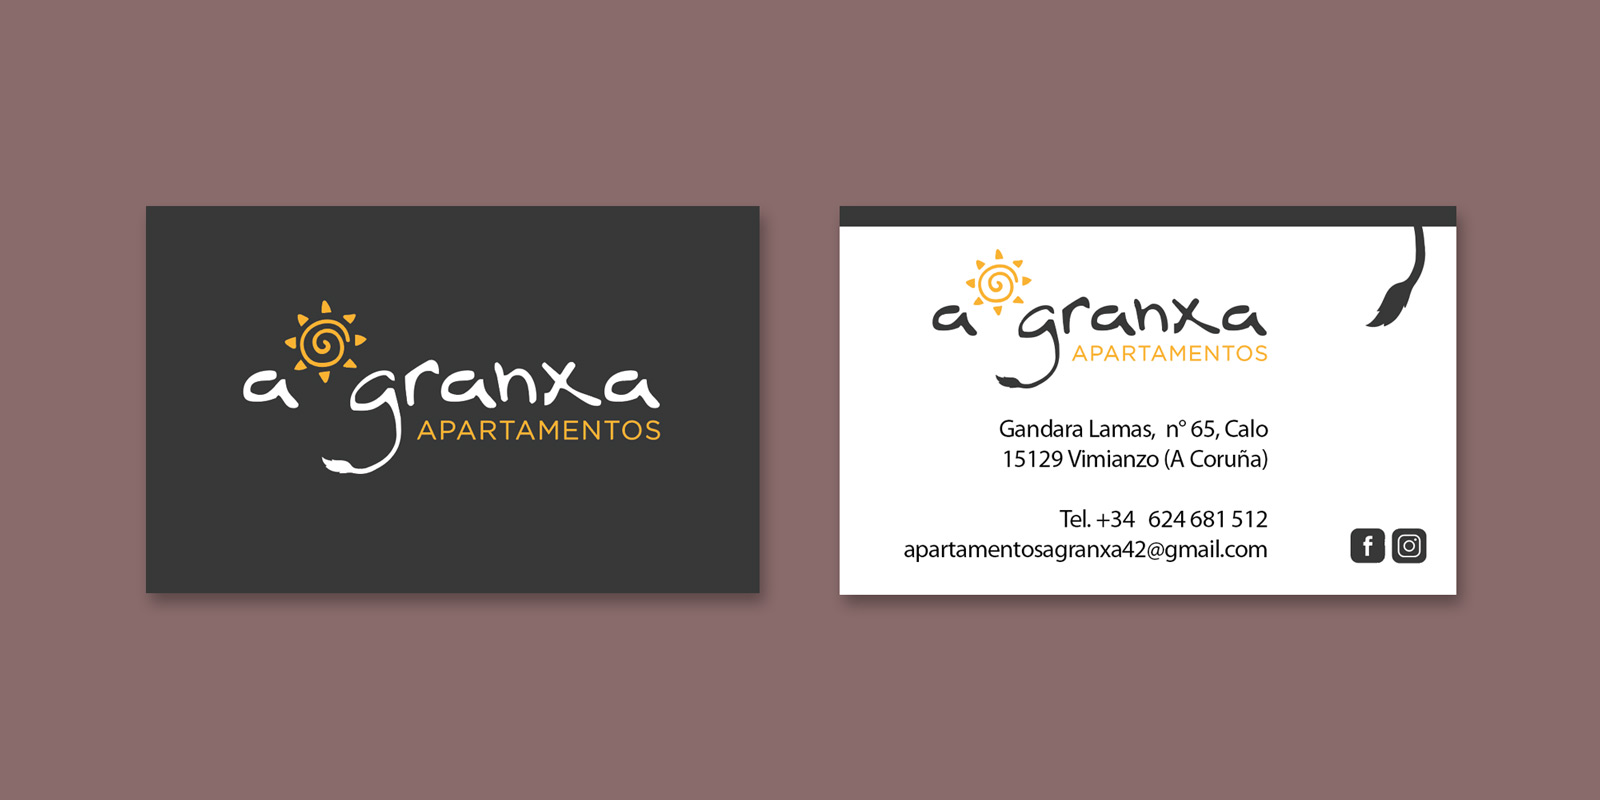 Graphic and creative design of logo restyling and branding for a rural tourism accommodation: A Granxa